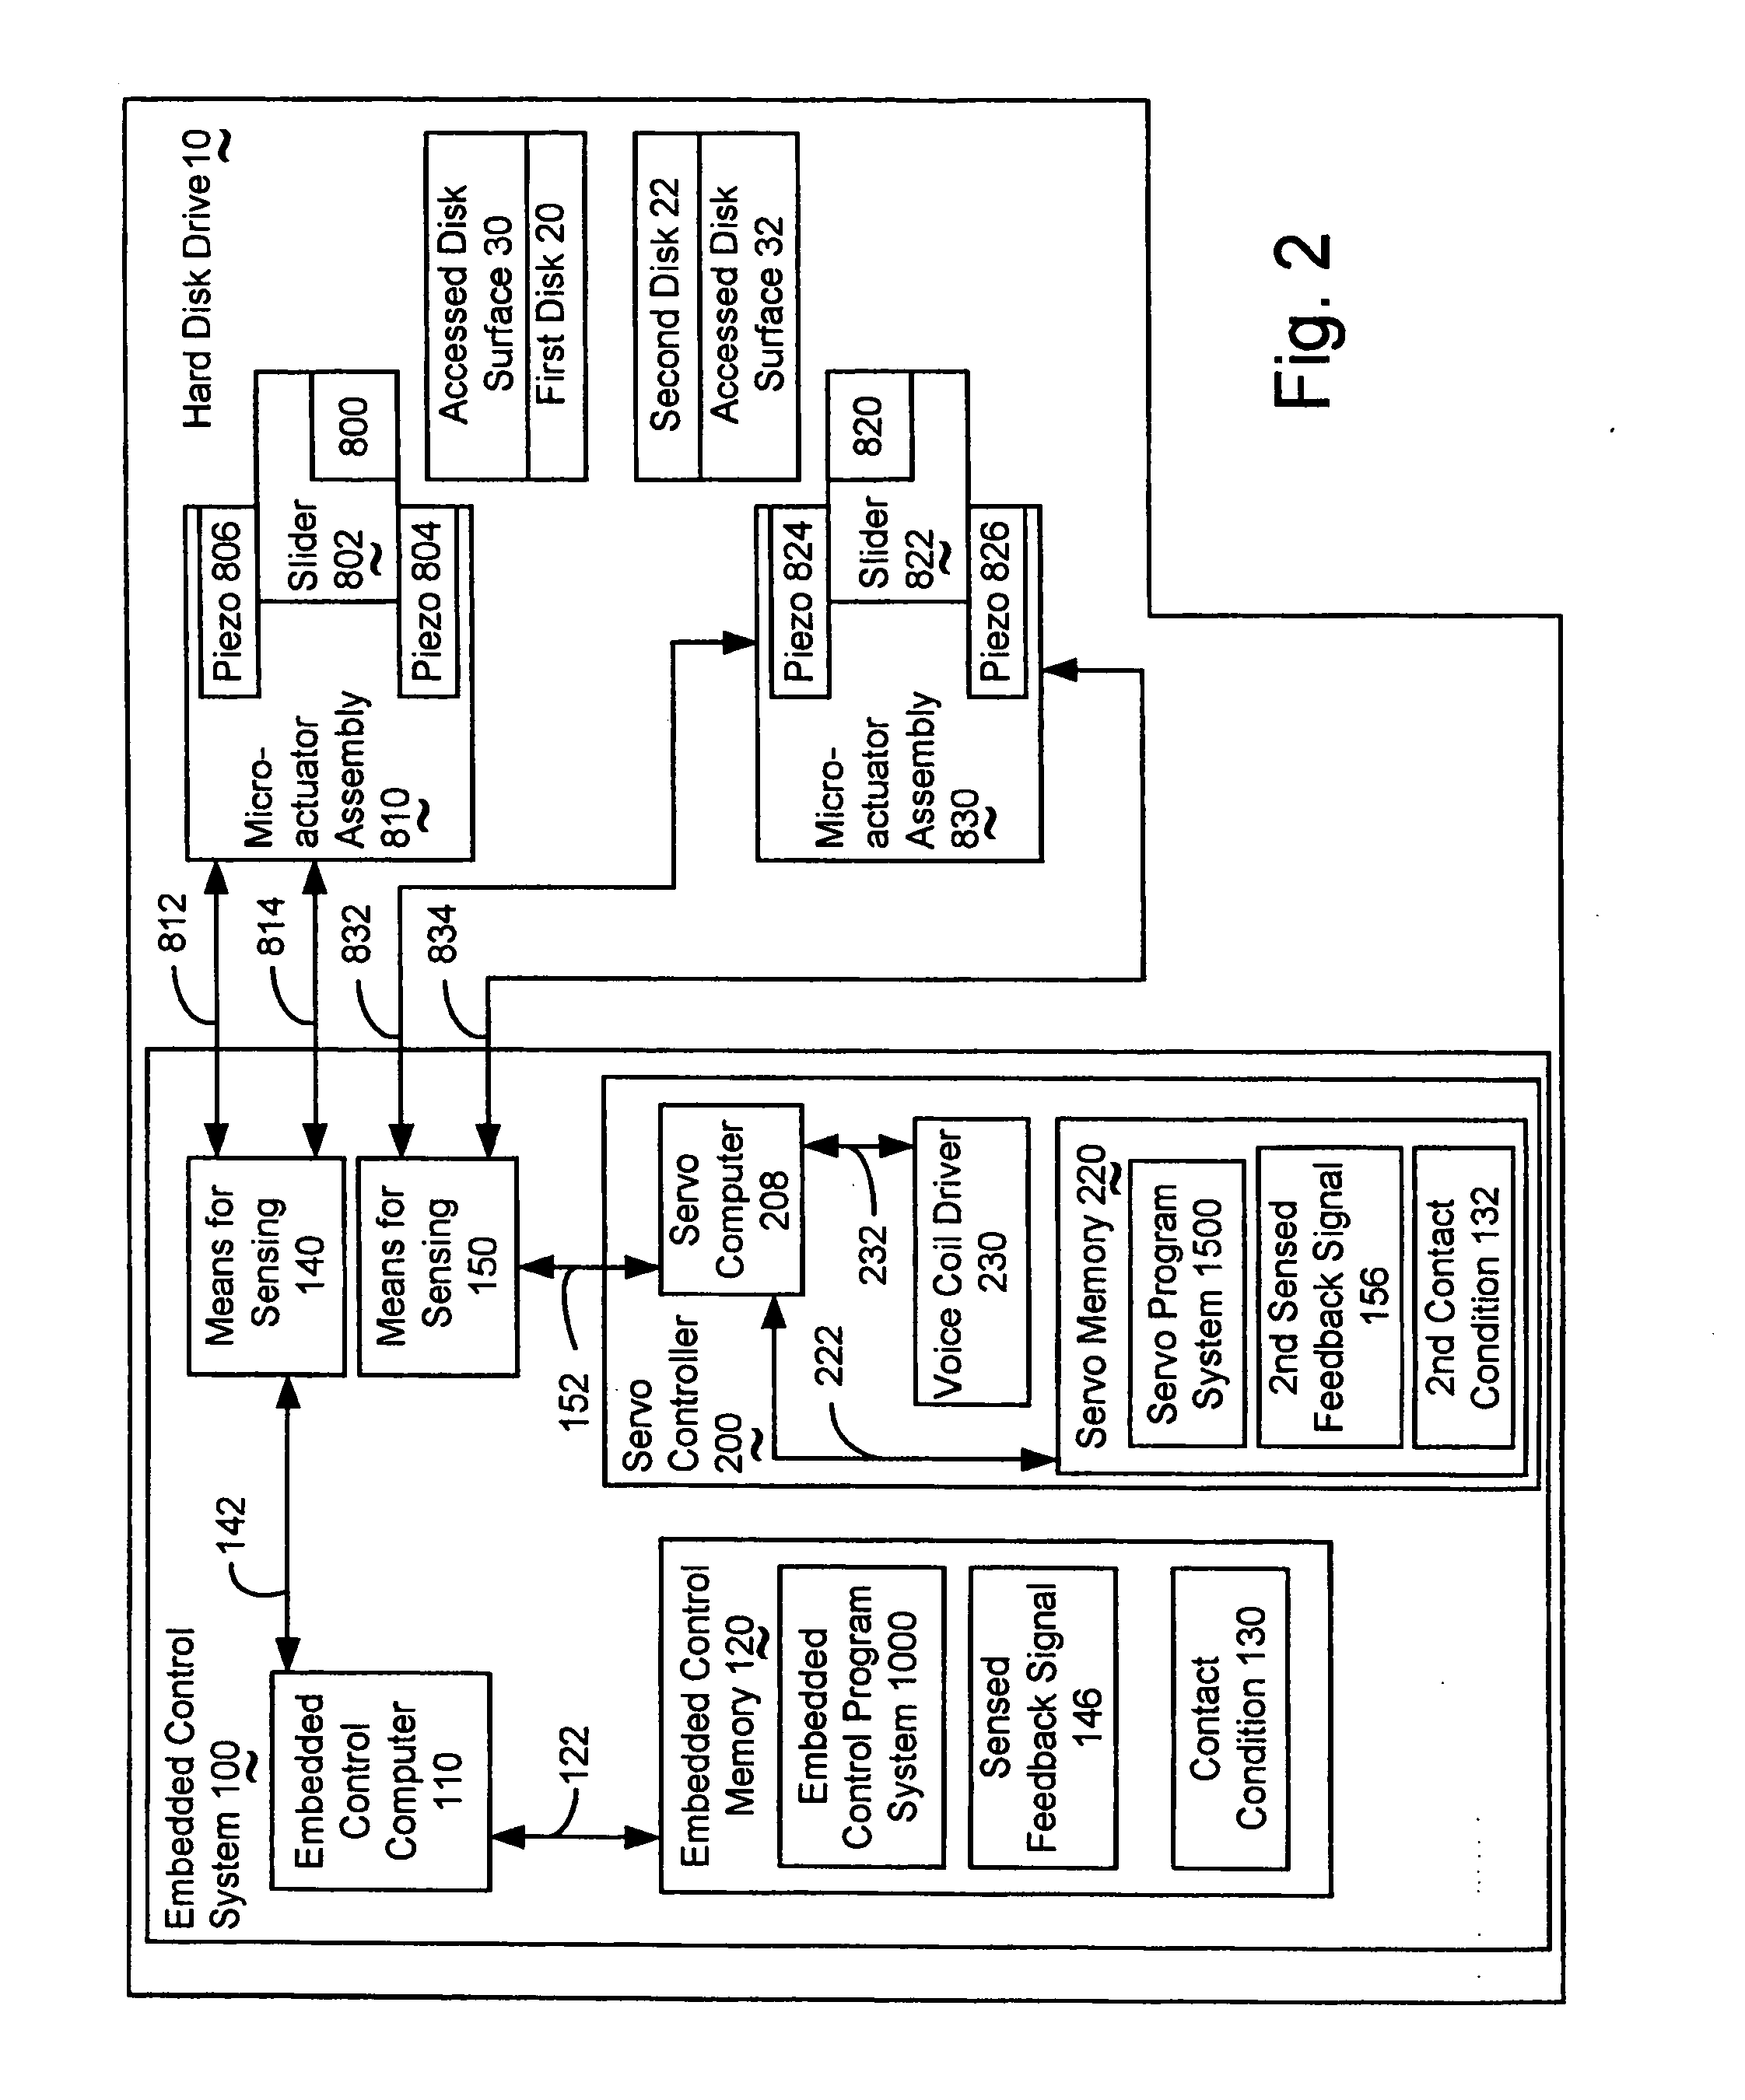 Apparatus for detecting contact between a read-write head and the accessed disk surface in a hard disk drive